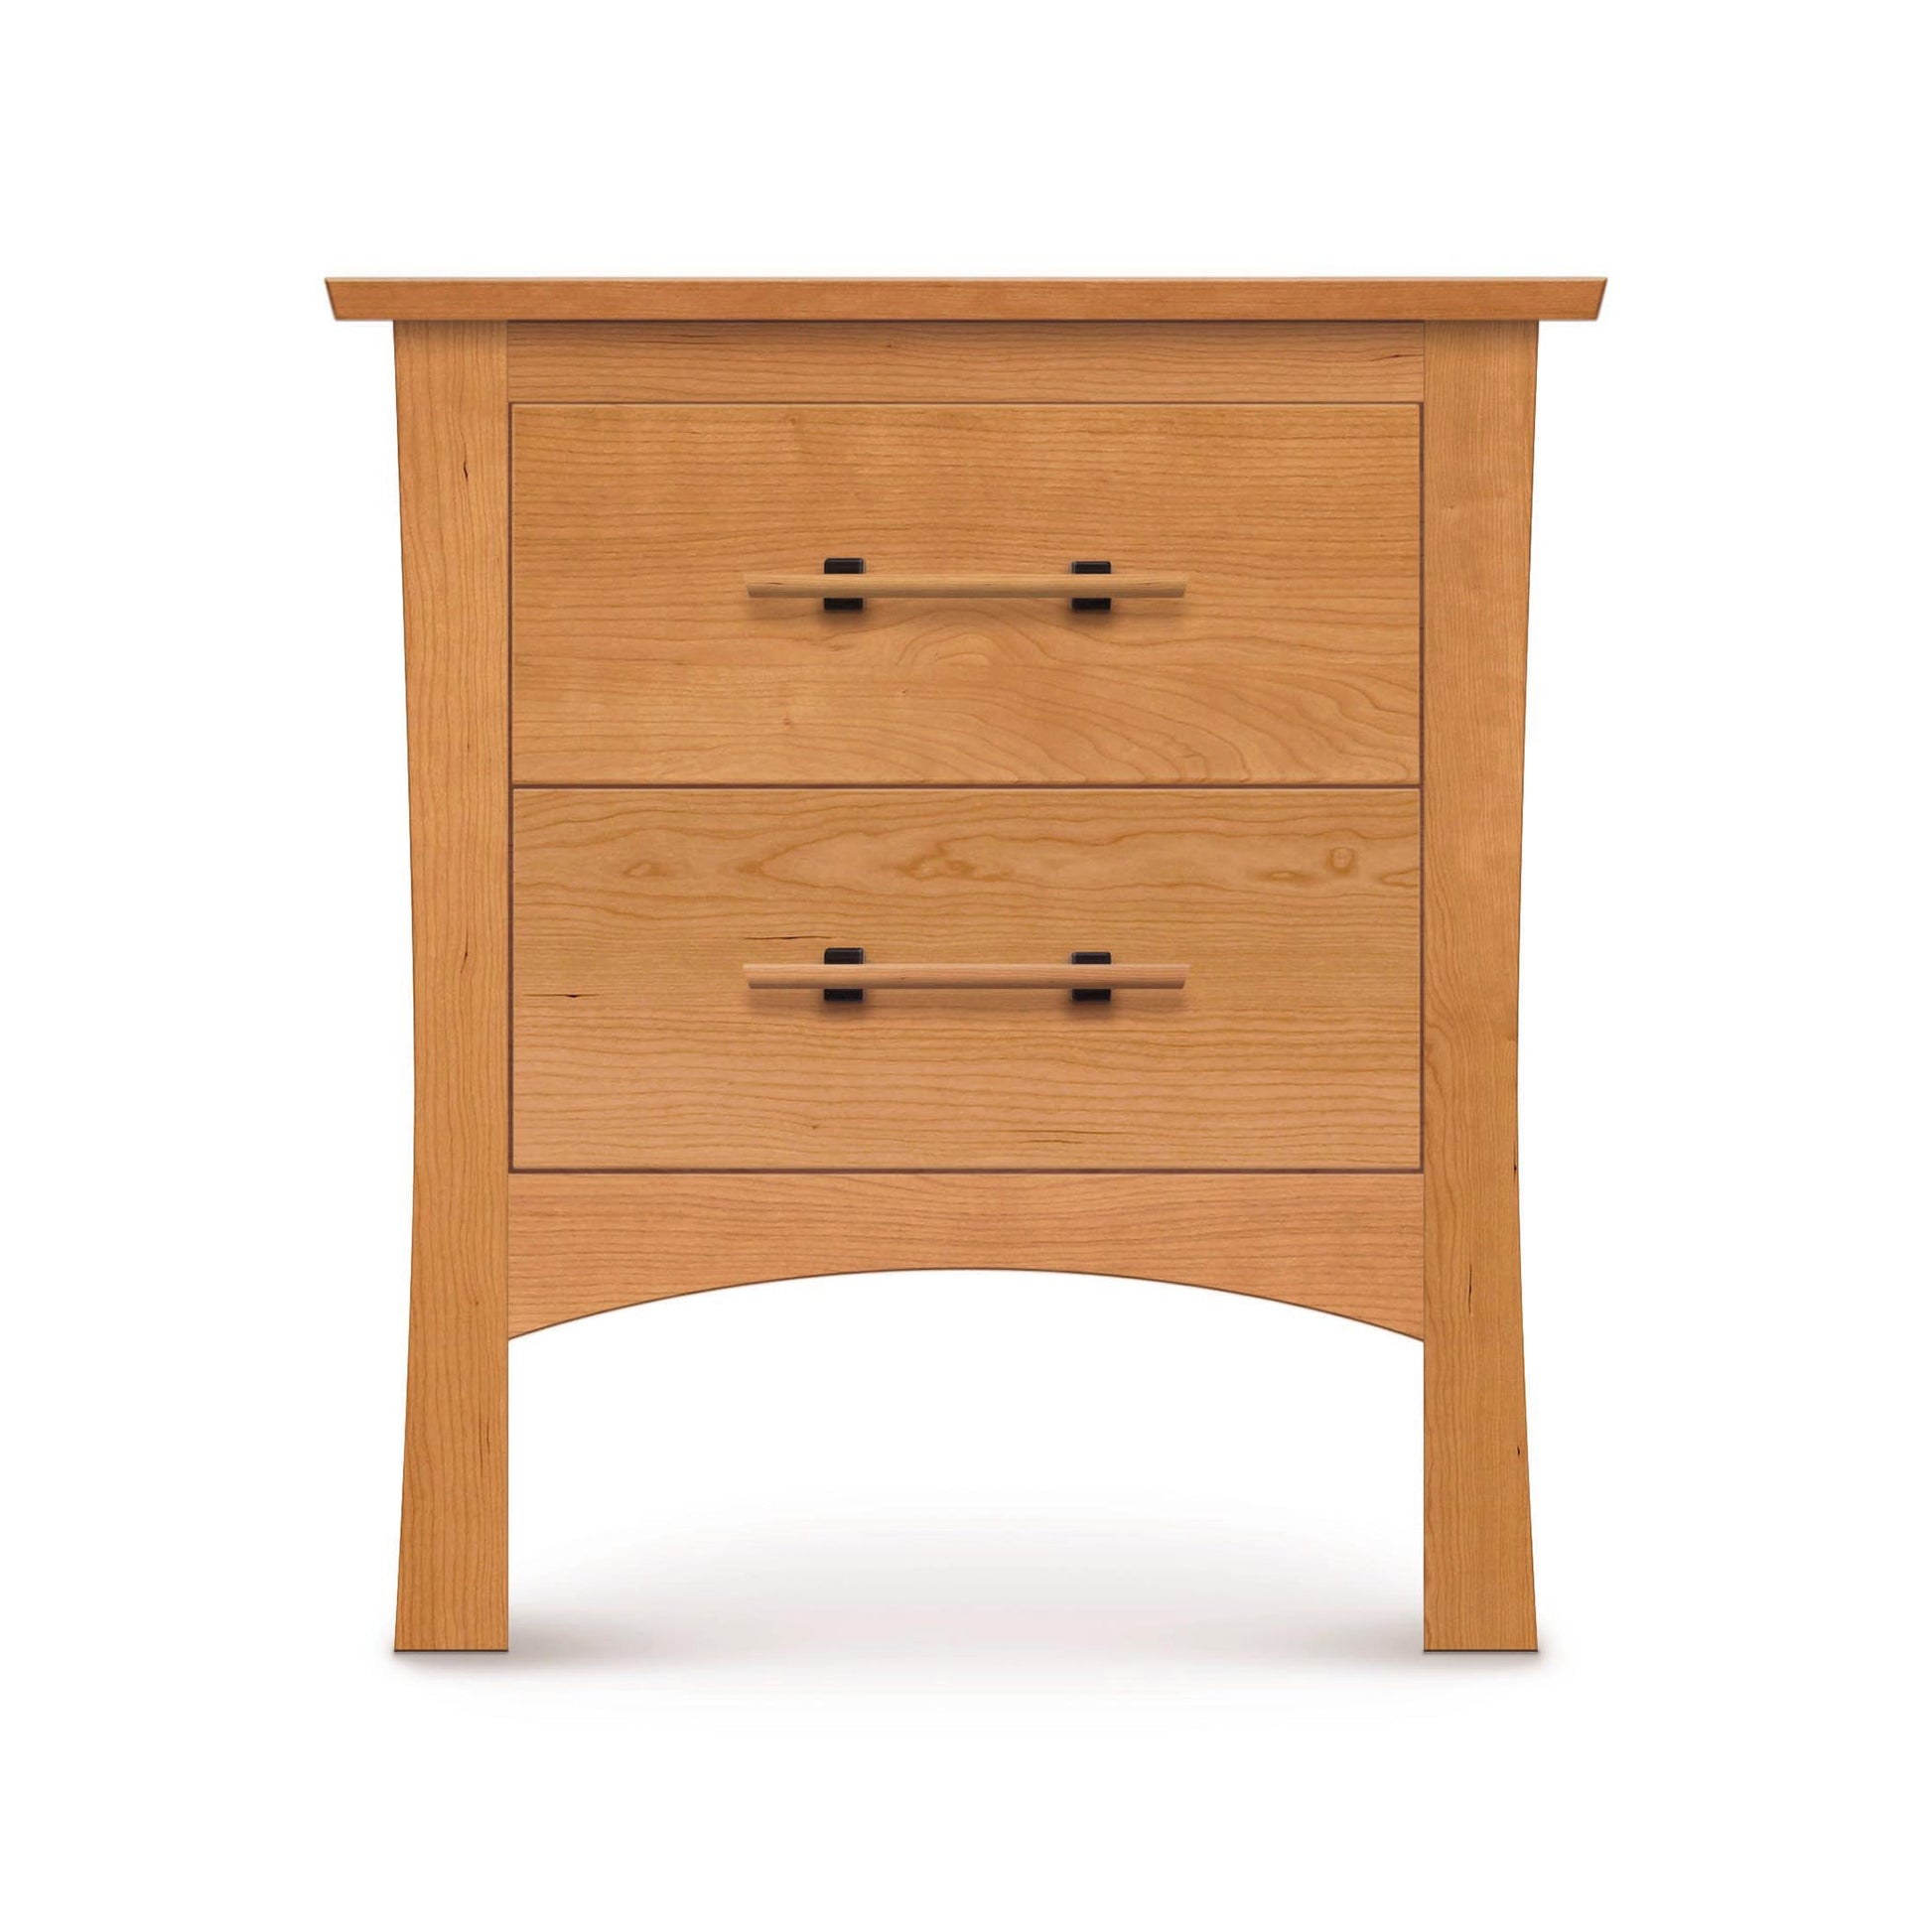 A nightstand with two drawers on a white background.